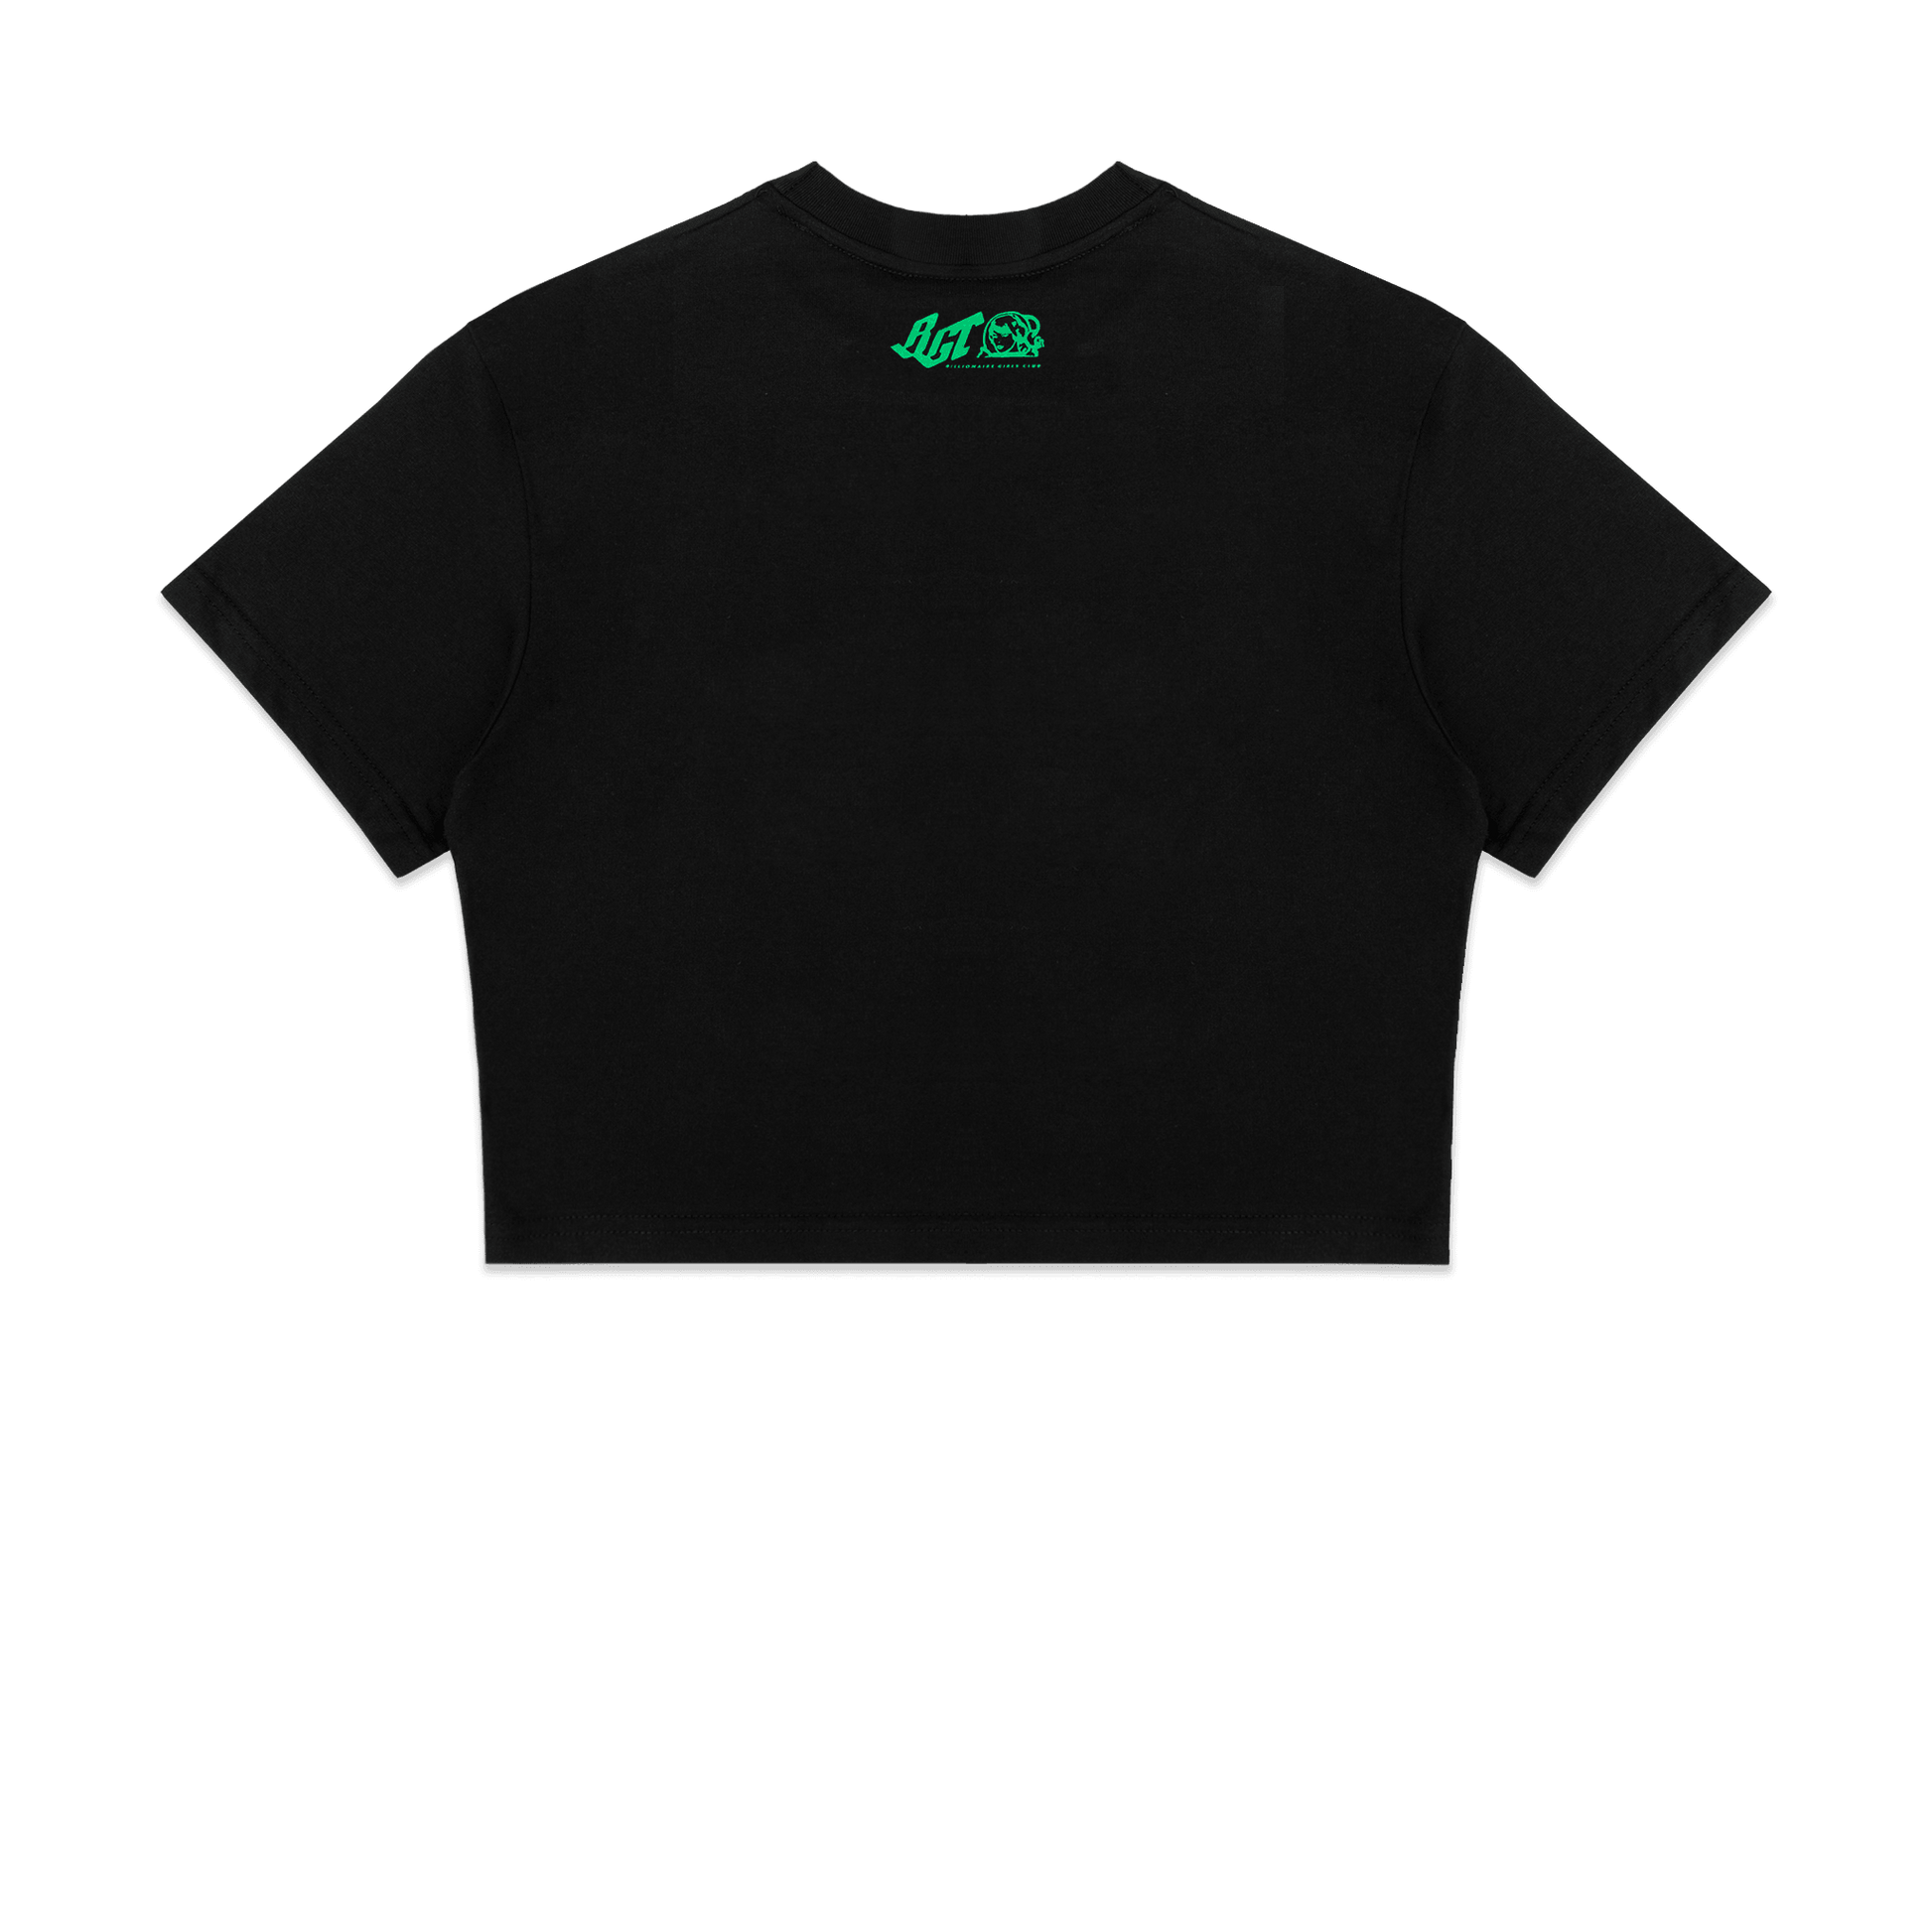 NYC OG Logo Cropped Tee - Billionaire Girls Club Exclusives